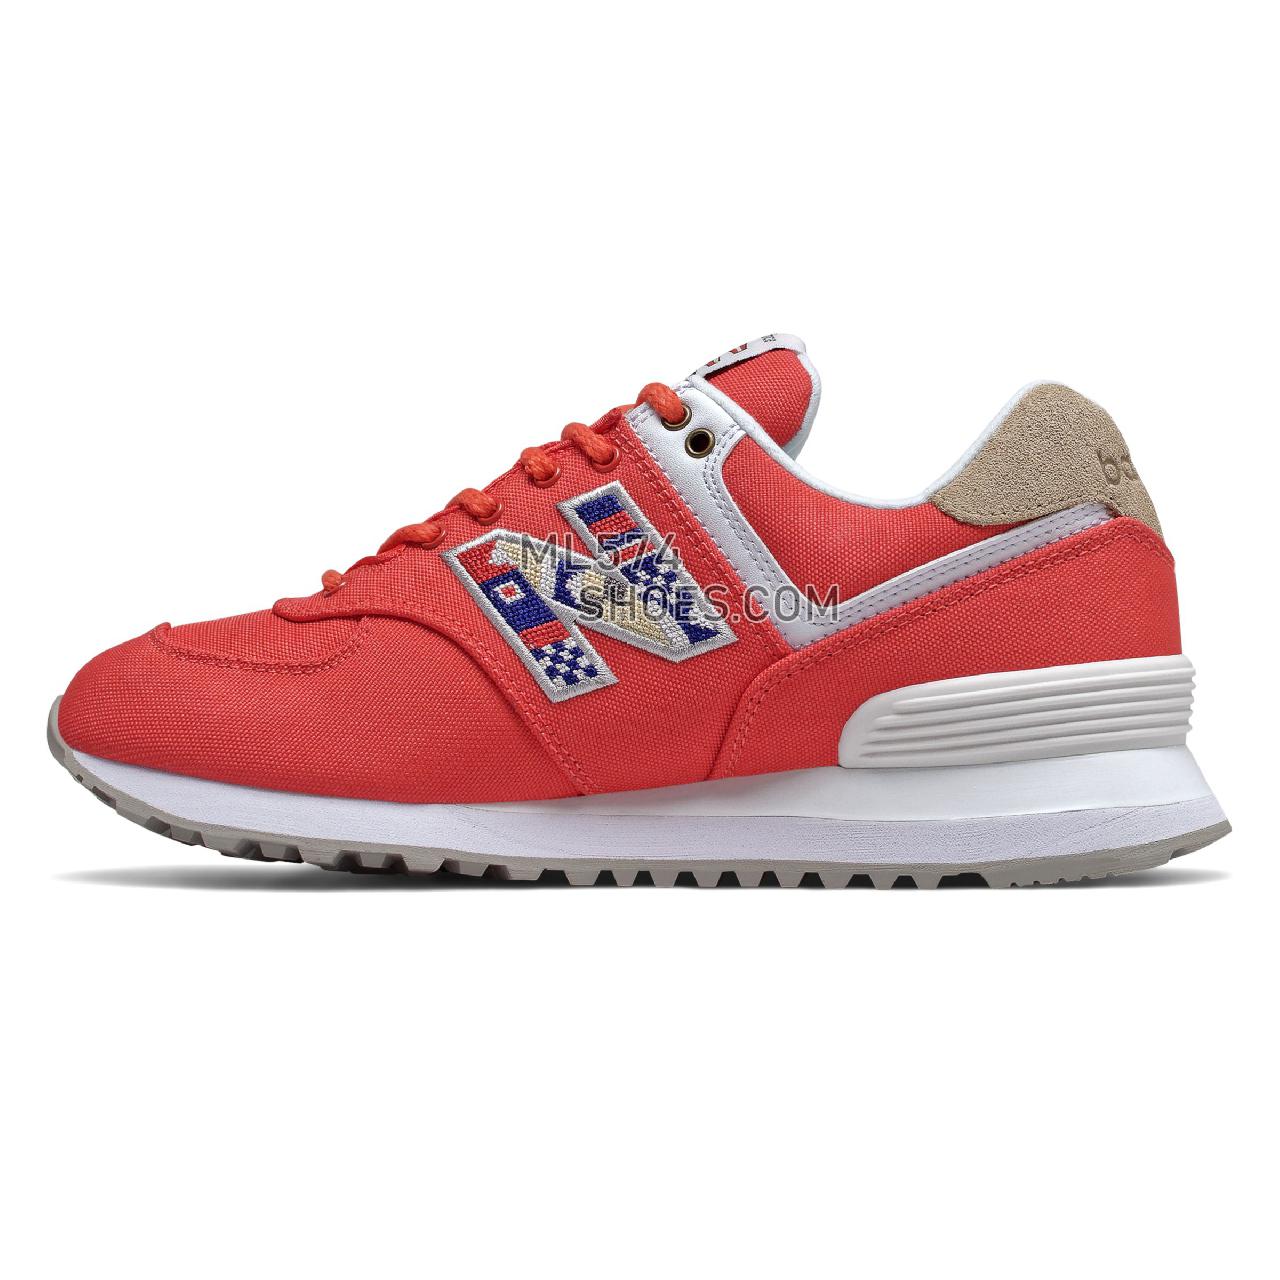 New Balance 574 - Women's Classic Sneakers - Toro Red with Incense - WL574SOF